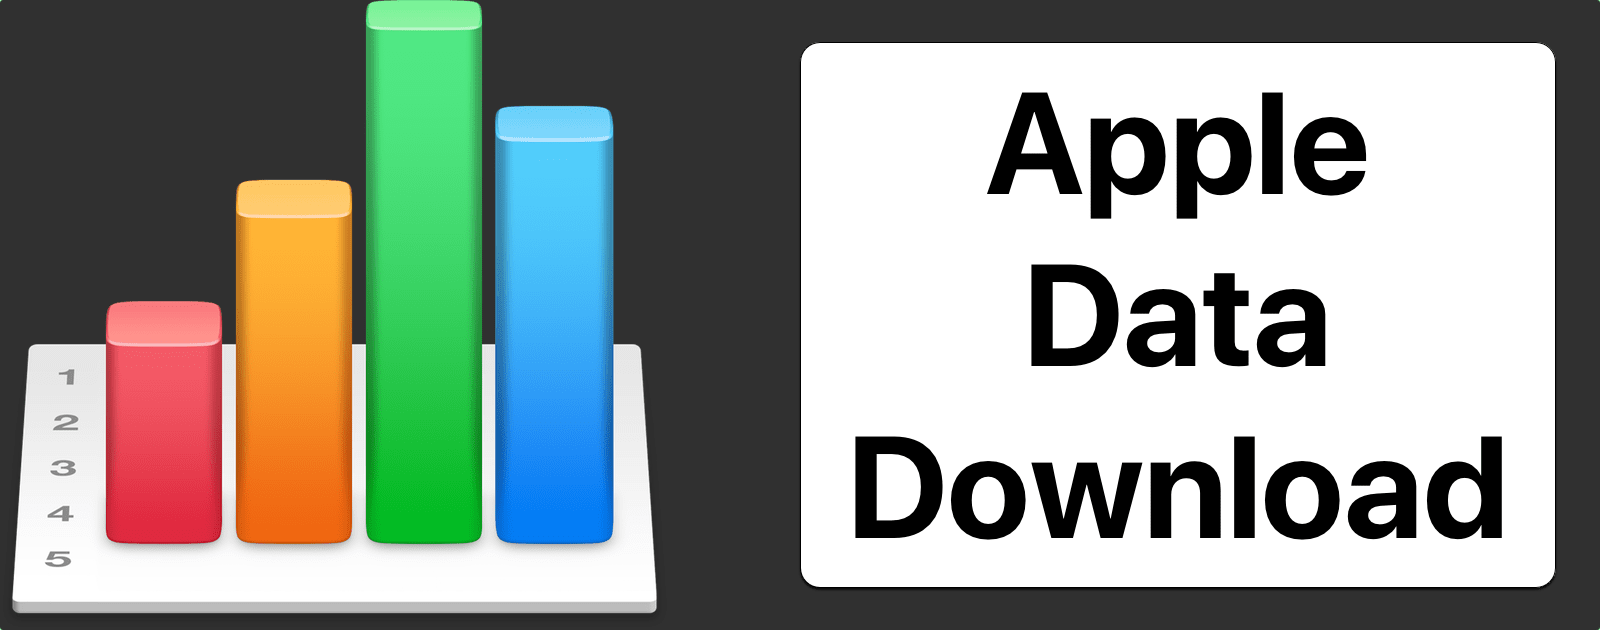 Your Apple Data Download Can Tell You How Much You Spent